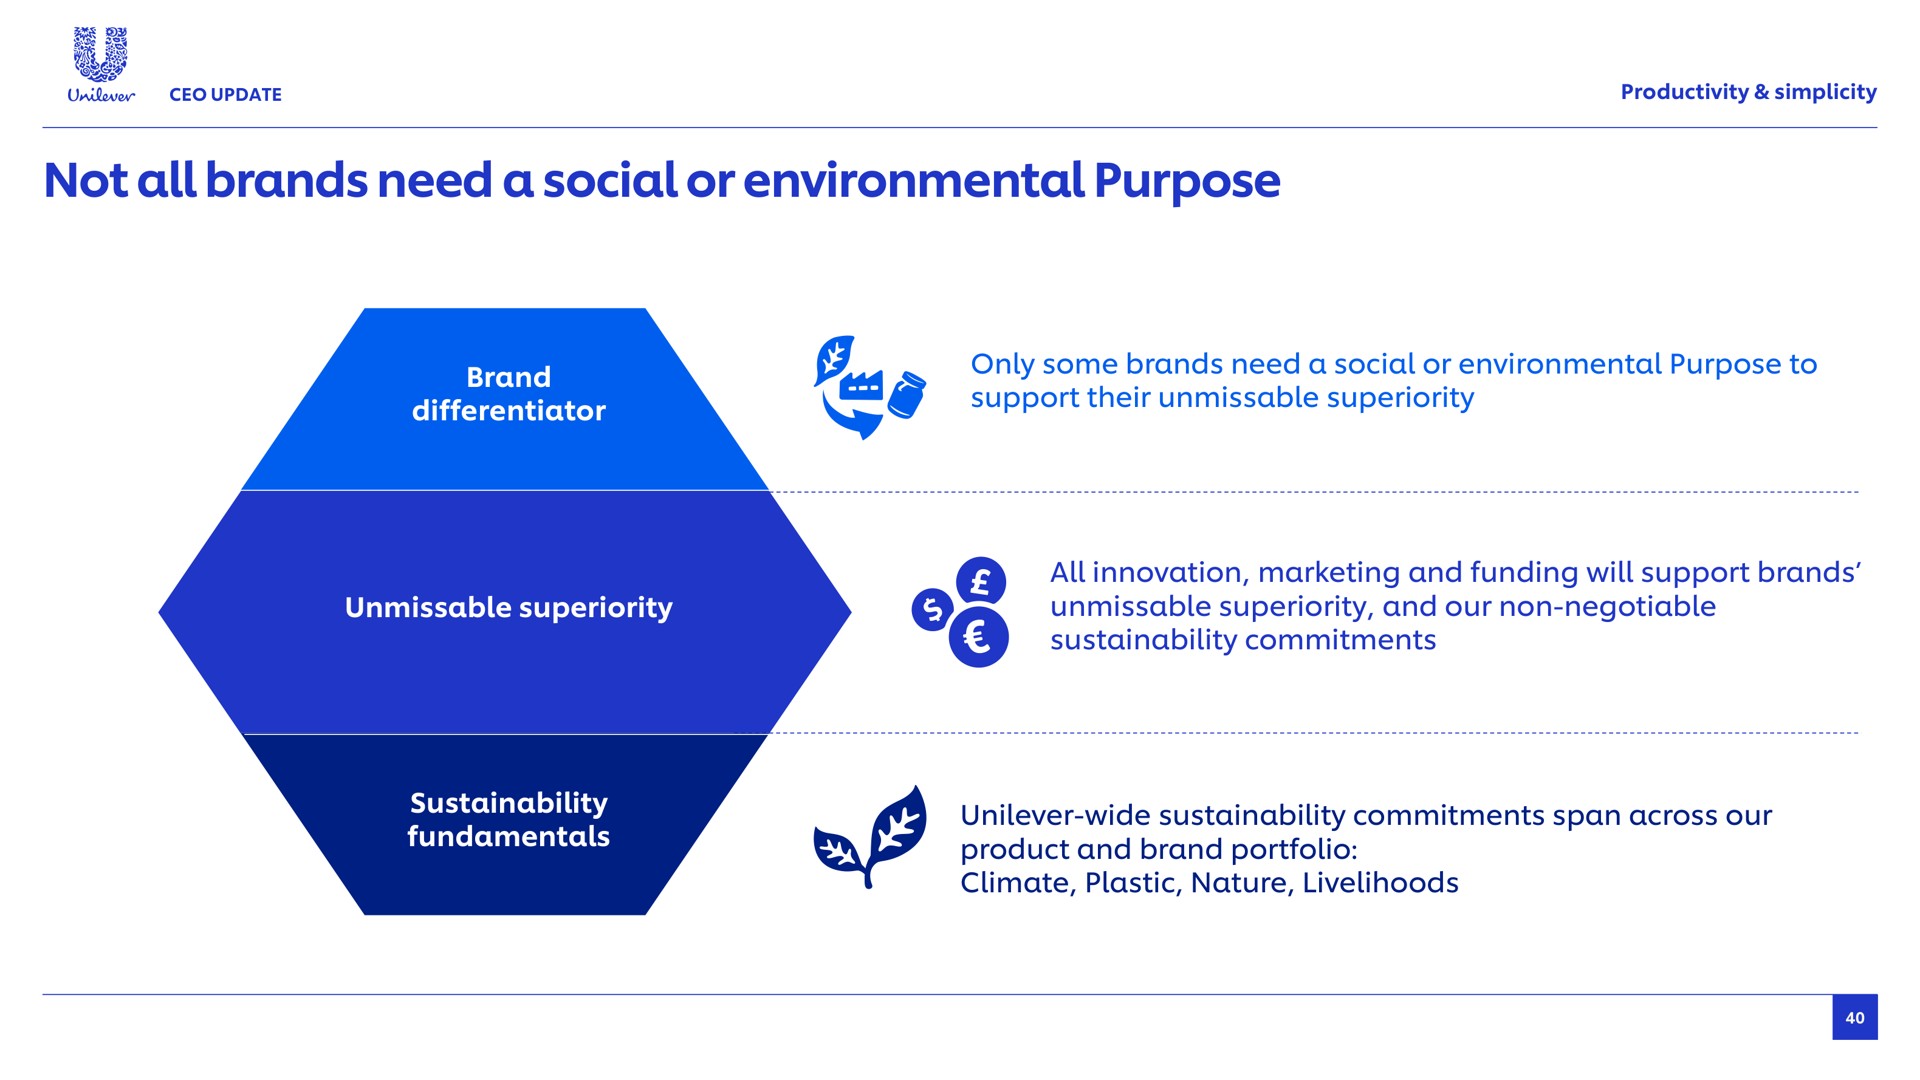 not all brands need a social or environmental purpose productivity simplicity eat differentiator only some to support their unmissable superiority unmissable superiority innovation marketing and funding will support unmissable superiority and our non negotiable commitments pipet wide commitments span across our product and brand portfolio climate plastic nature livelihoods | Unilever